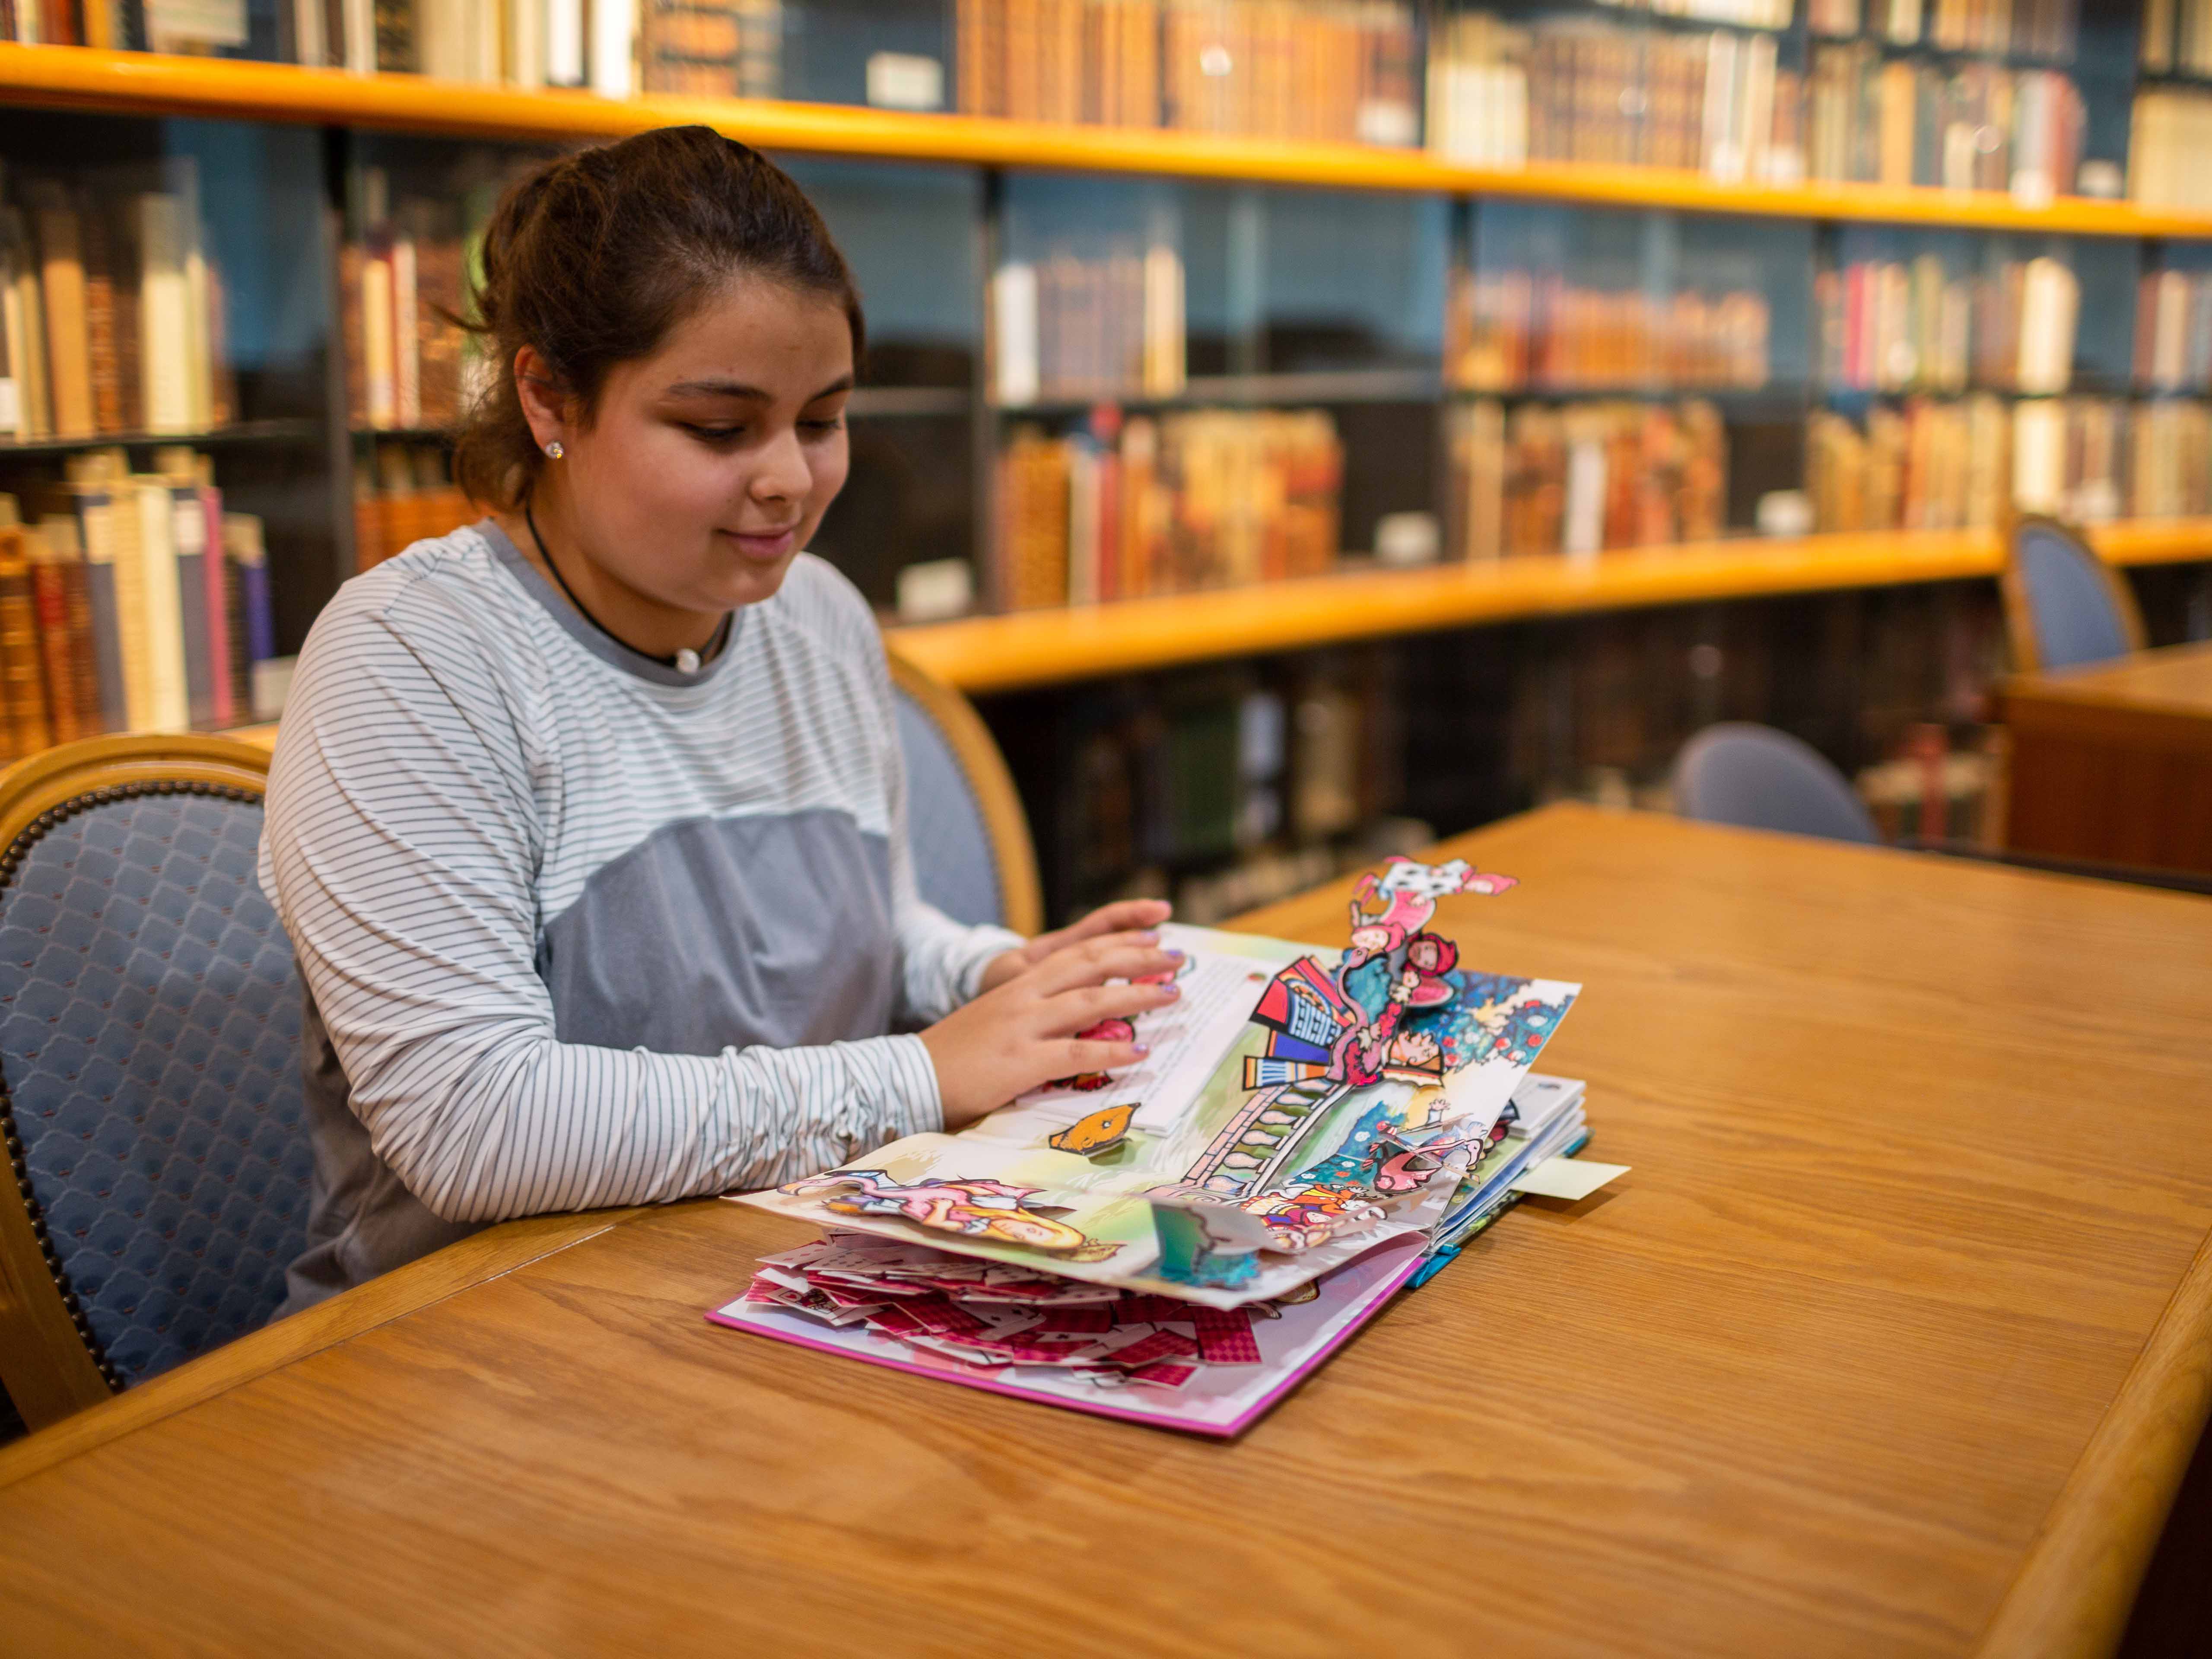 A student looks at a pop-up book